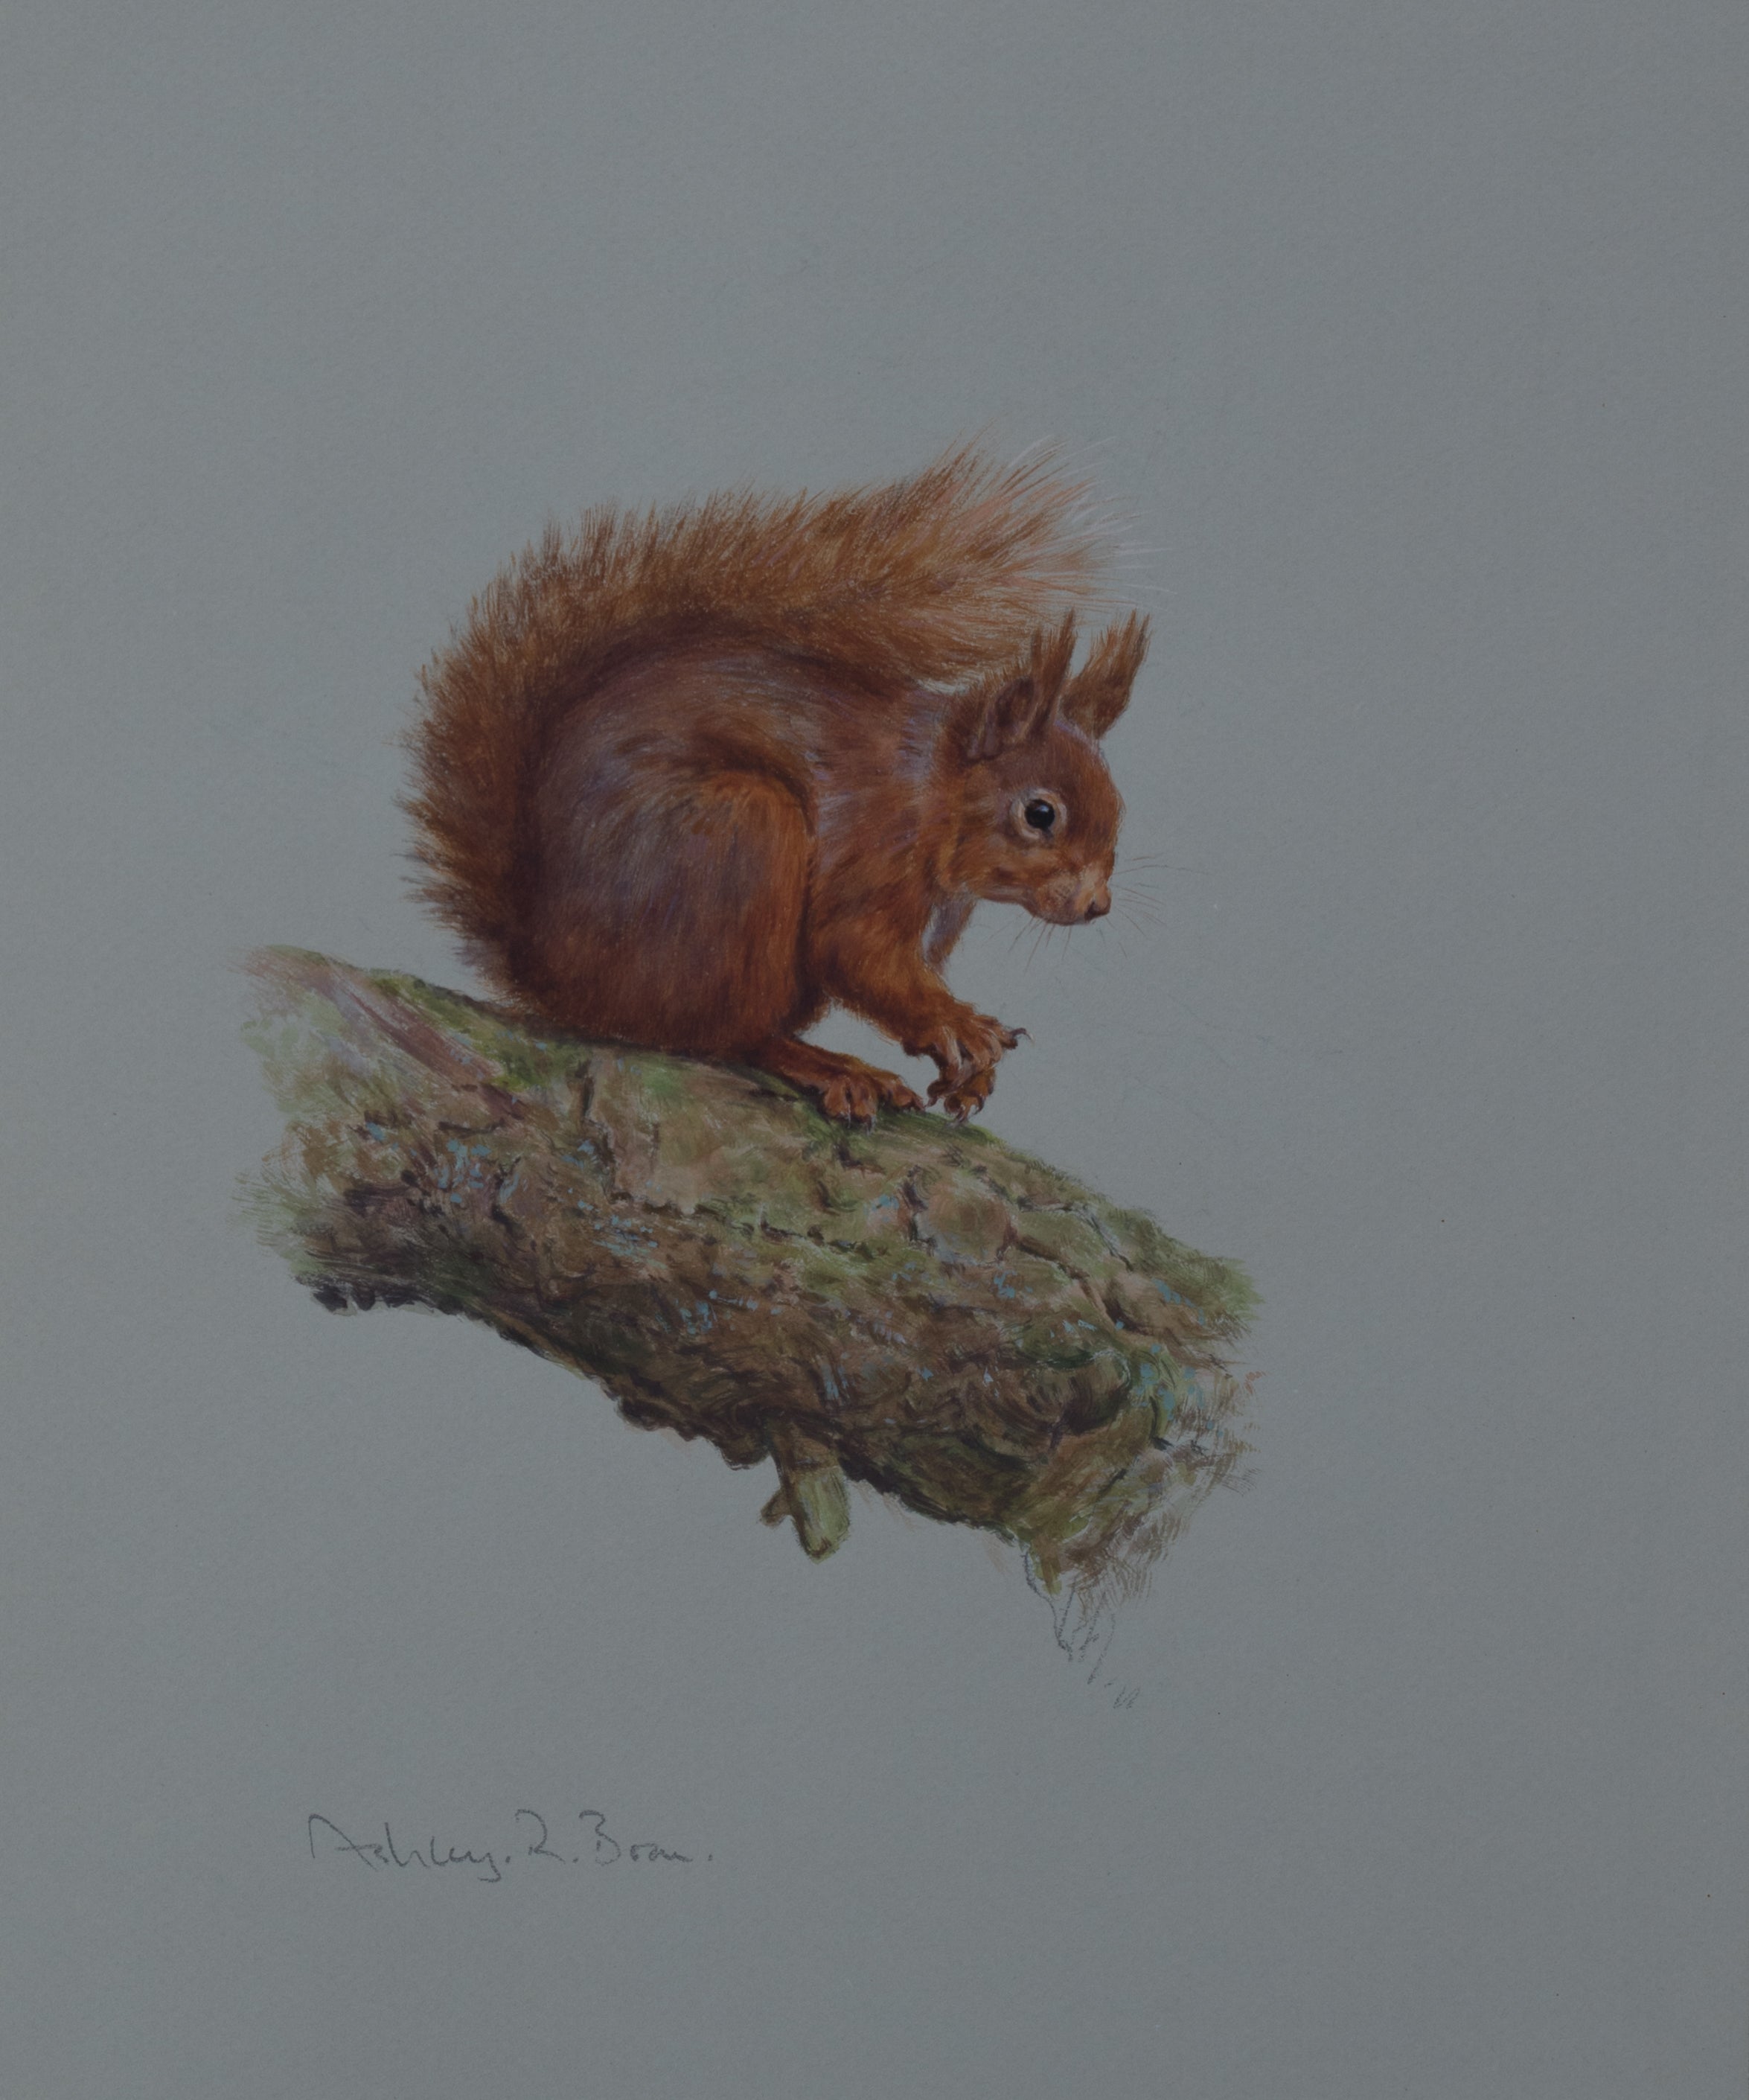 'Red Squirrel I' - Original watercolour by Ashley Boon - 12" x 9.5"